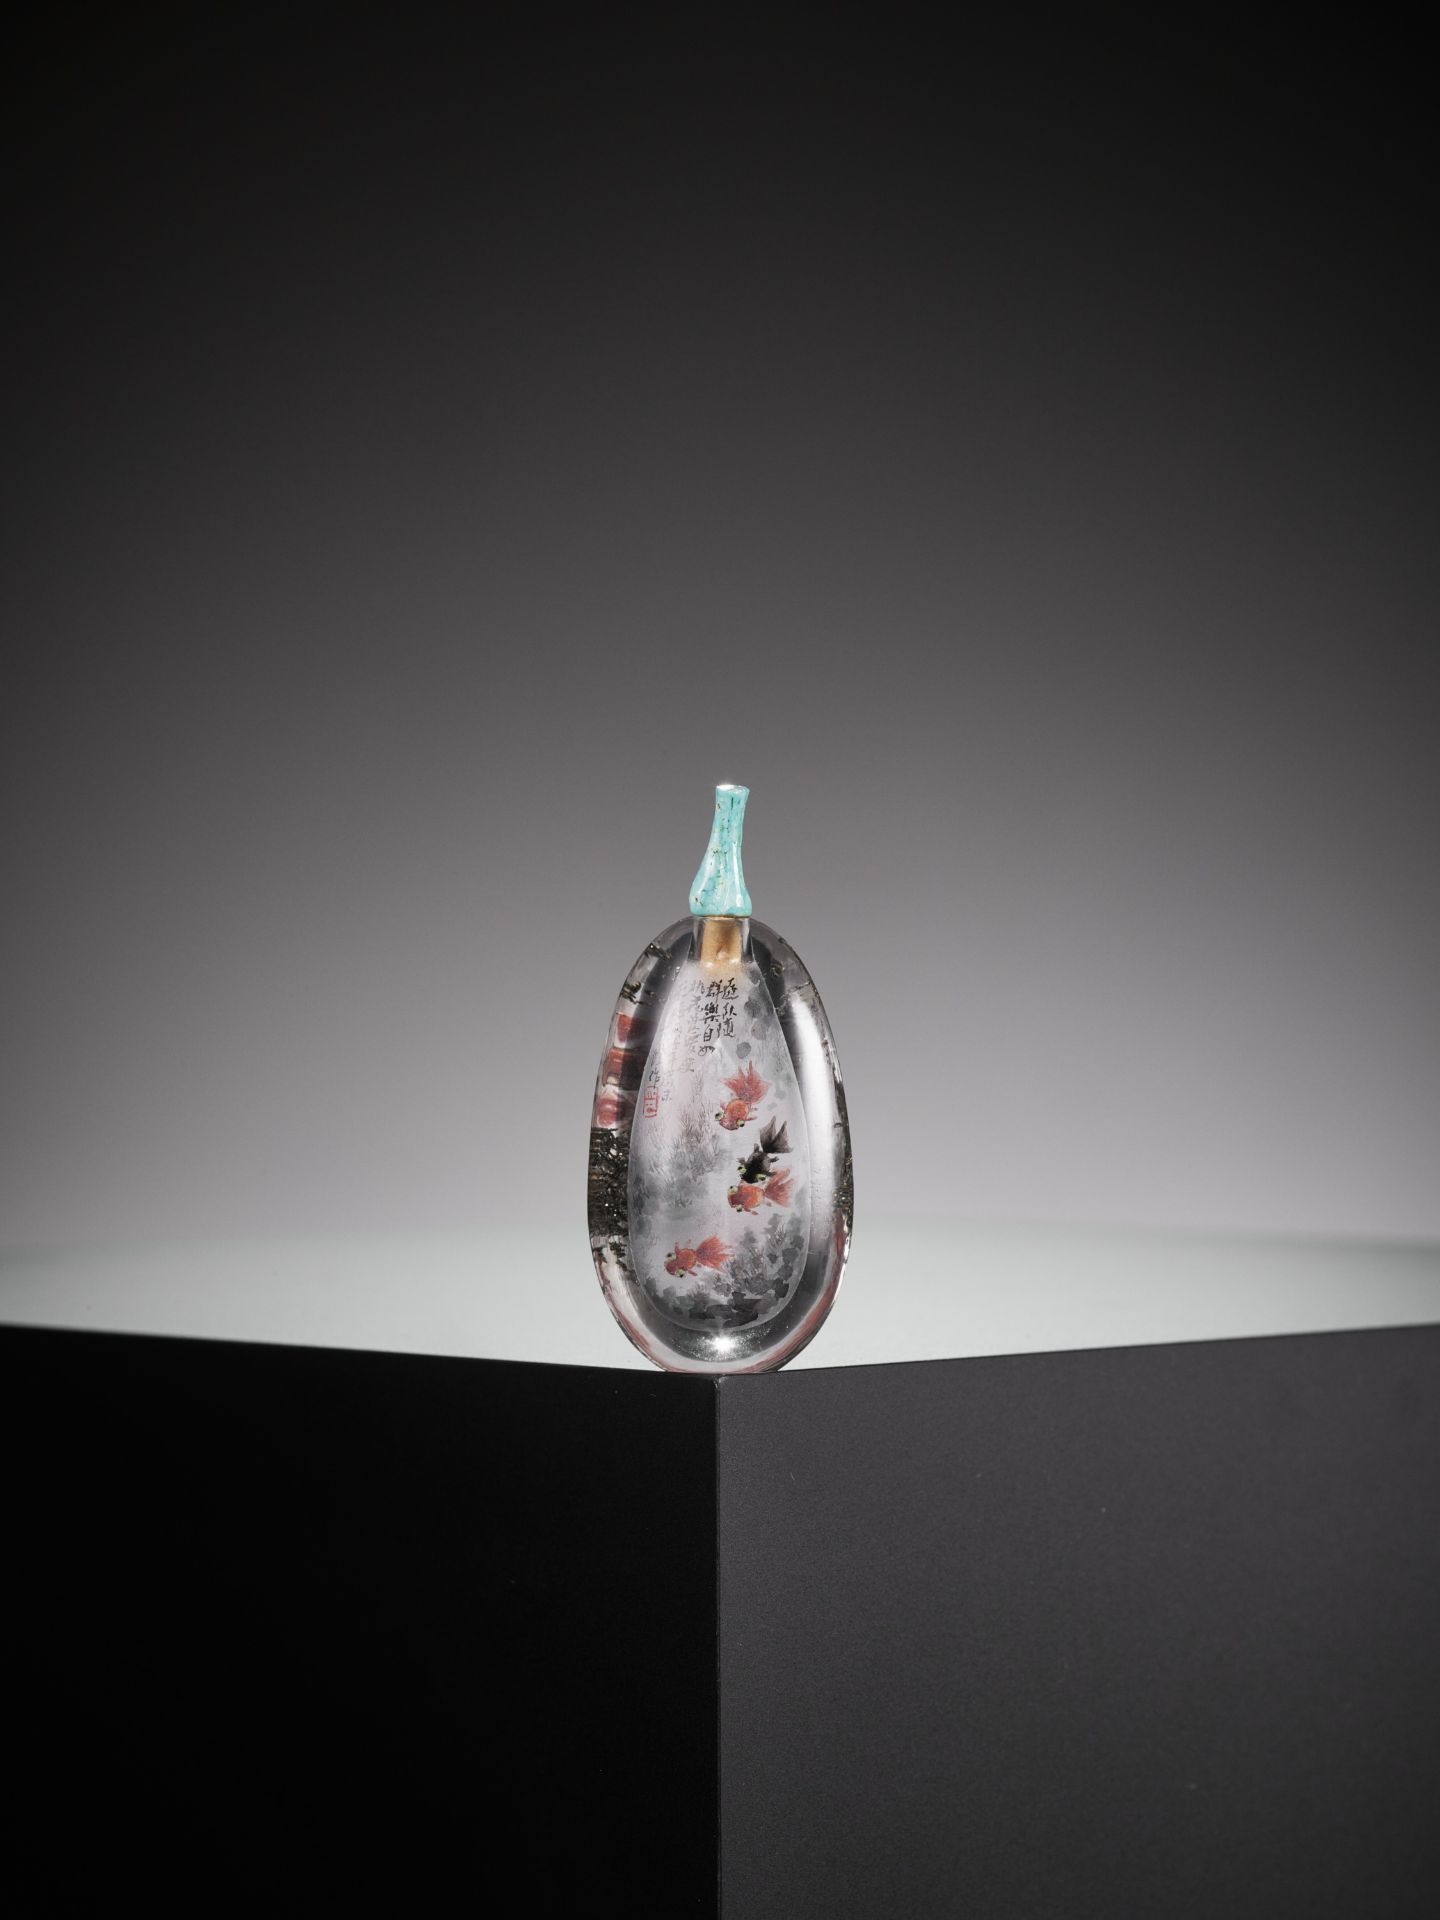 A MINIATURE INTERIOR-PAINTED ROCK CRYSTAL SNUFF BOTTLE, BY TIAN CHENG - Image 5 of 10